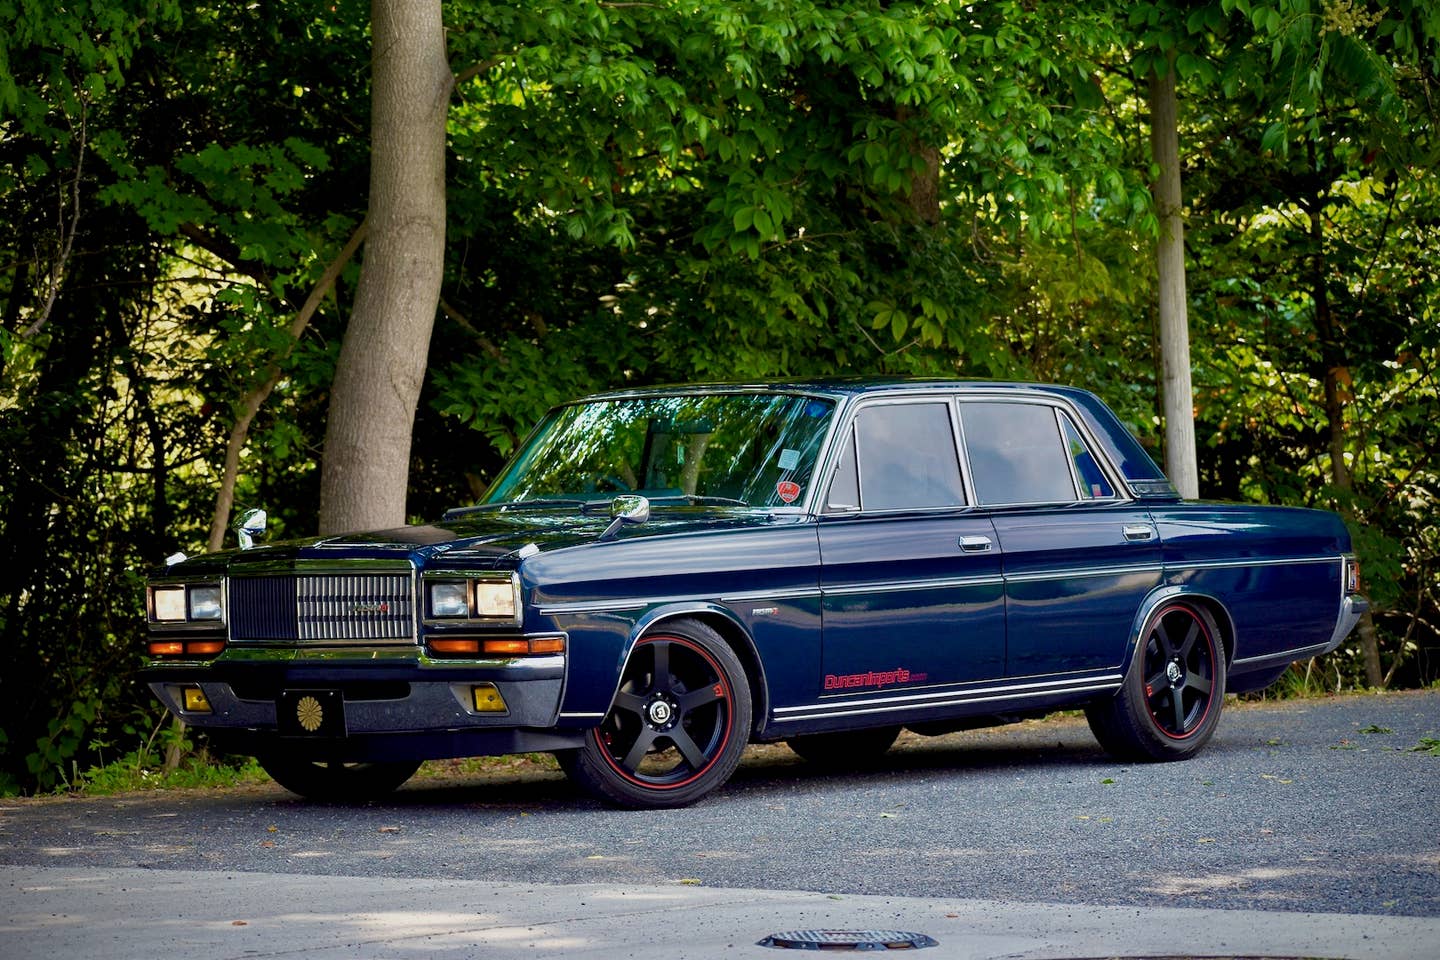 1989 Nissan President against a forested backdrop